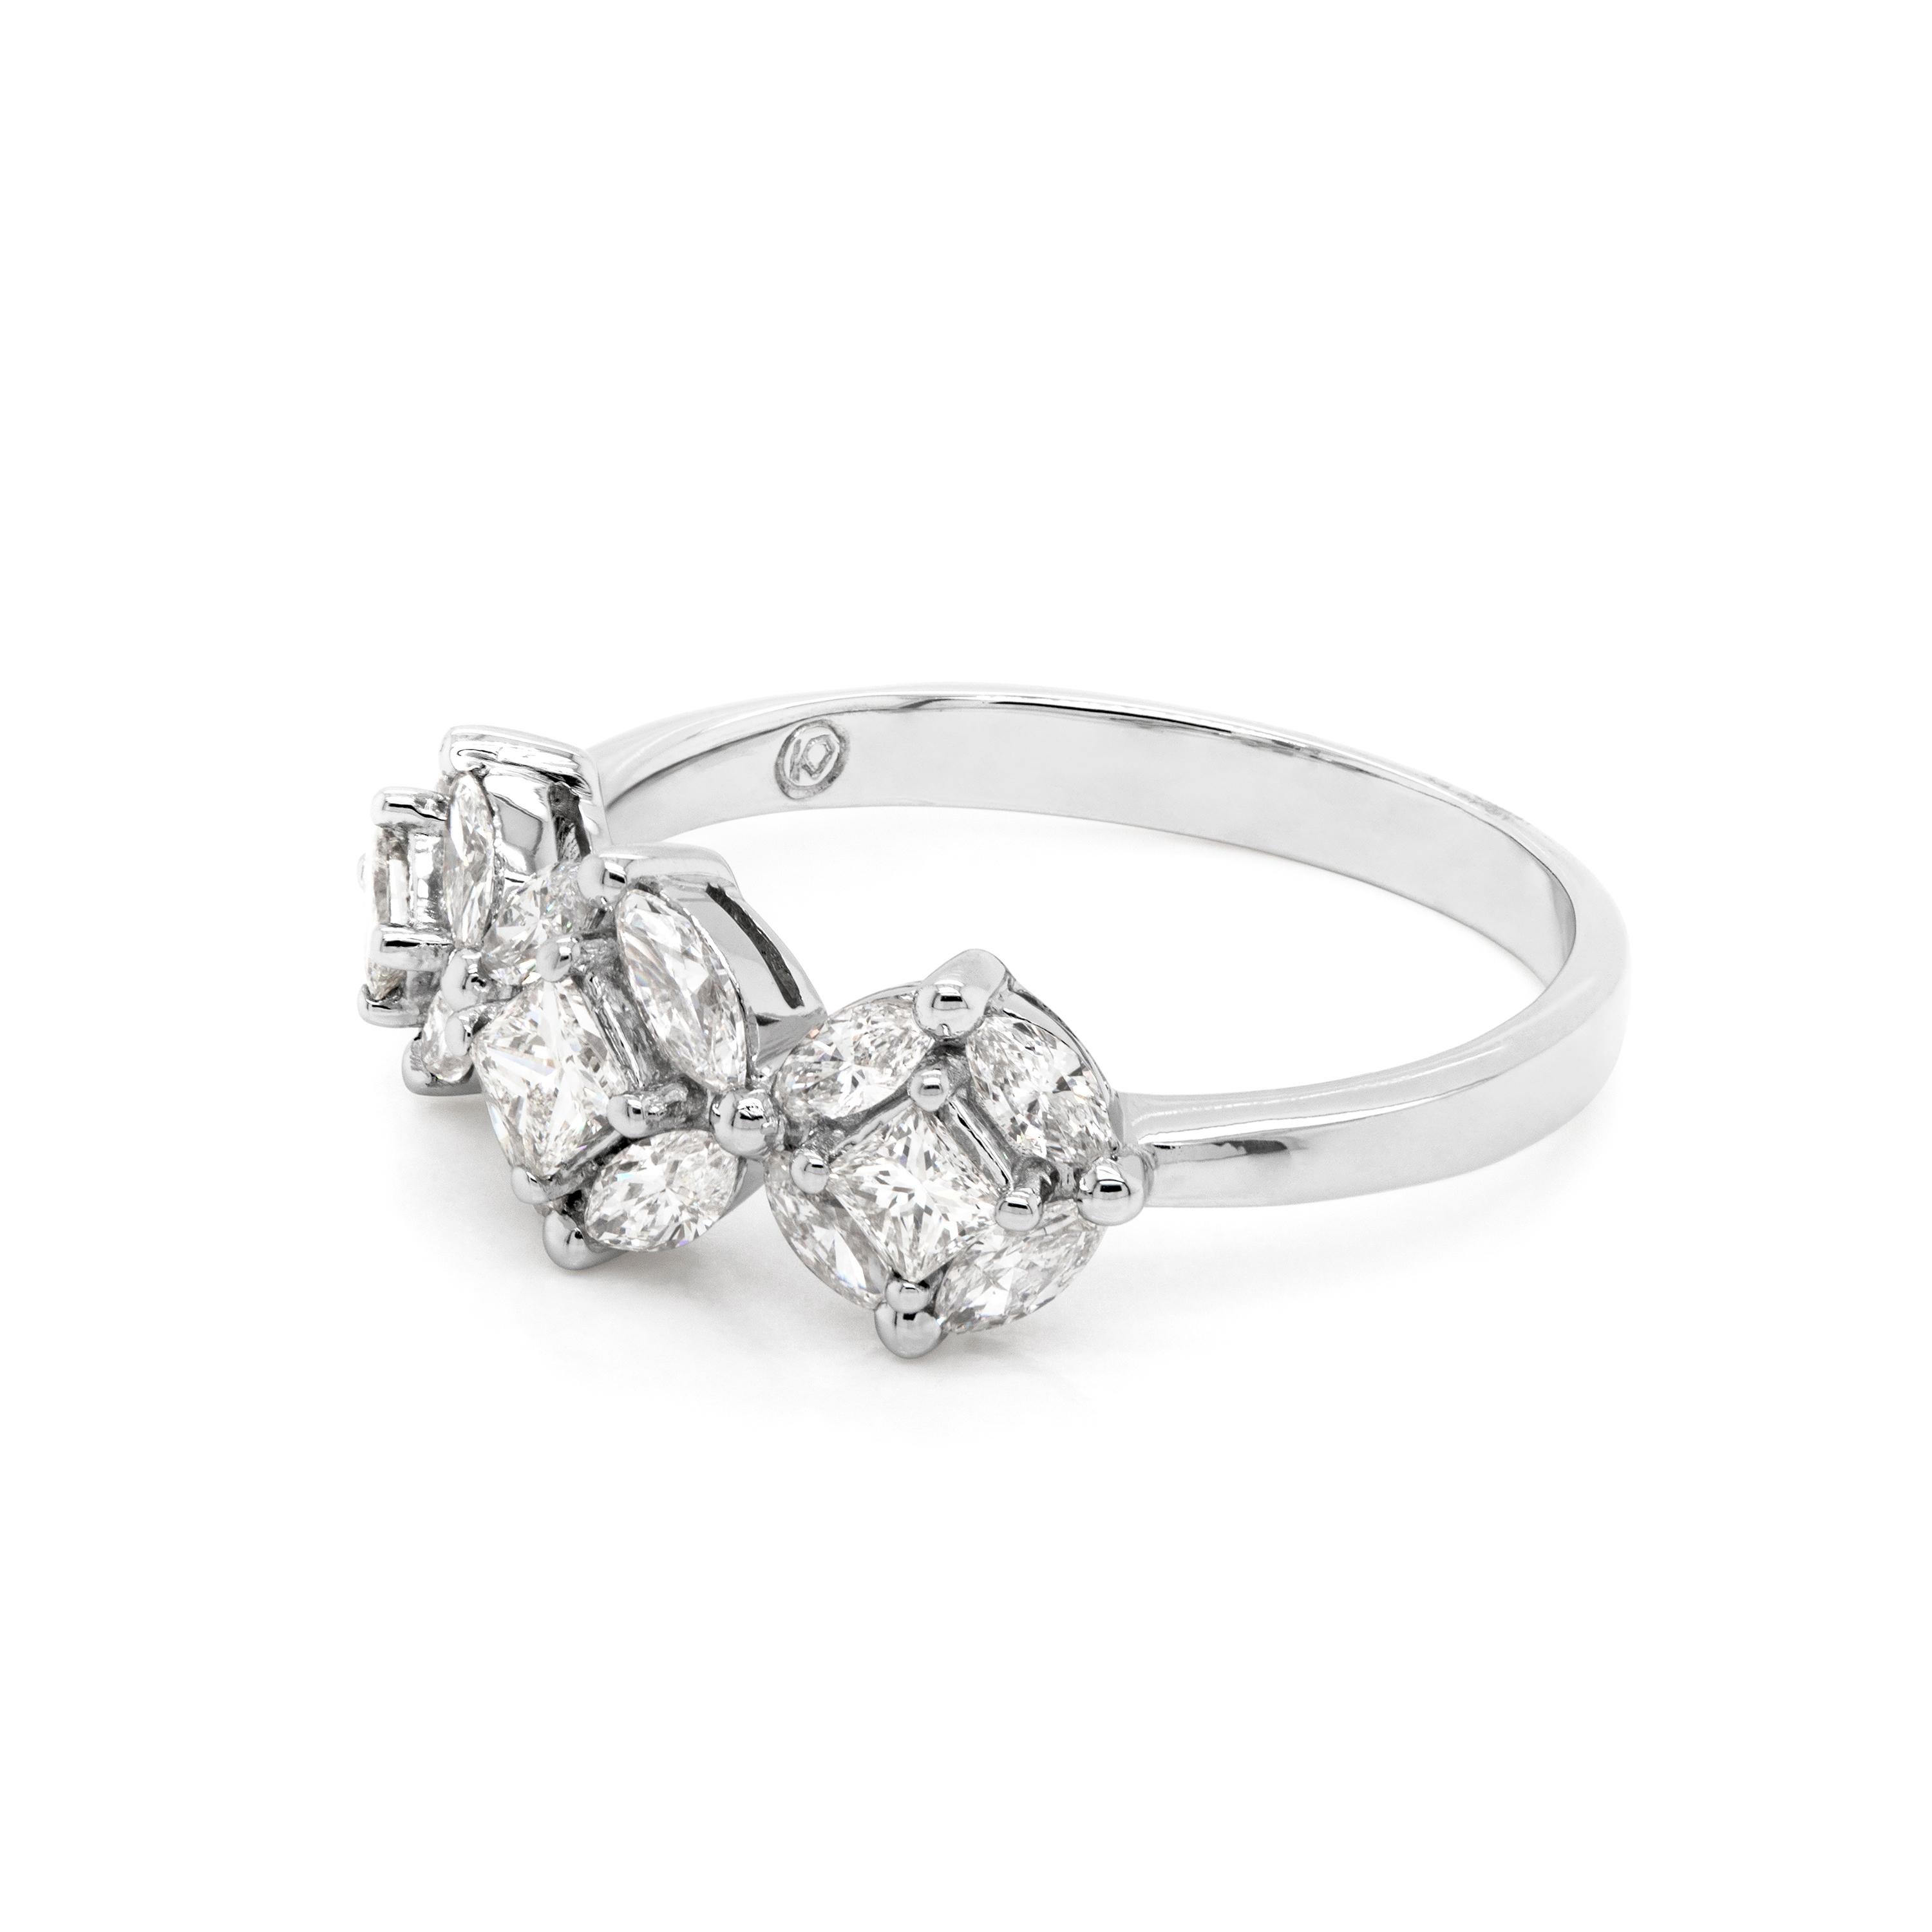 18ct white gold diamond cluster engagement ring